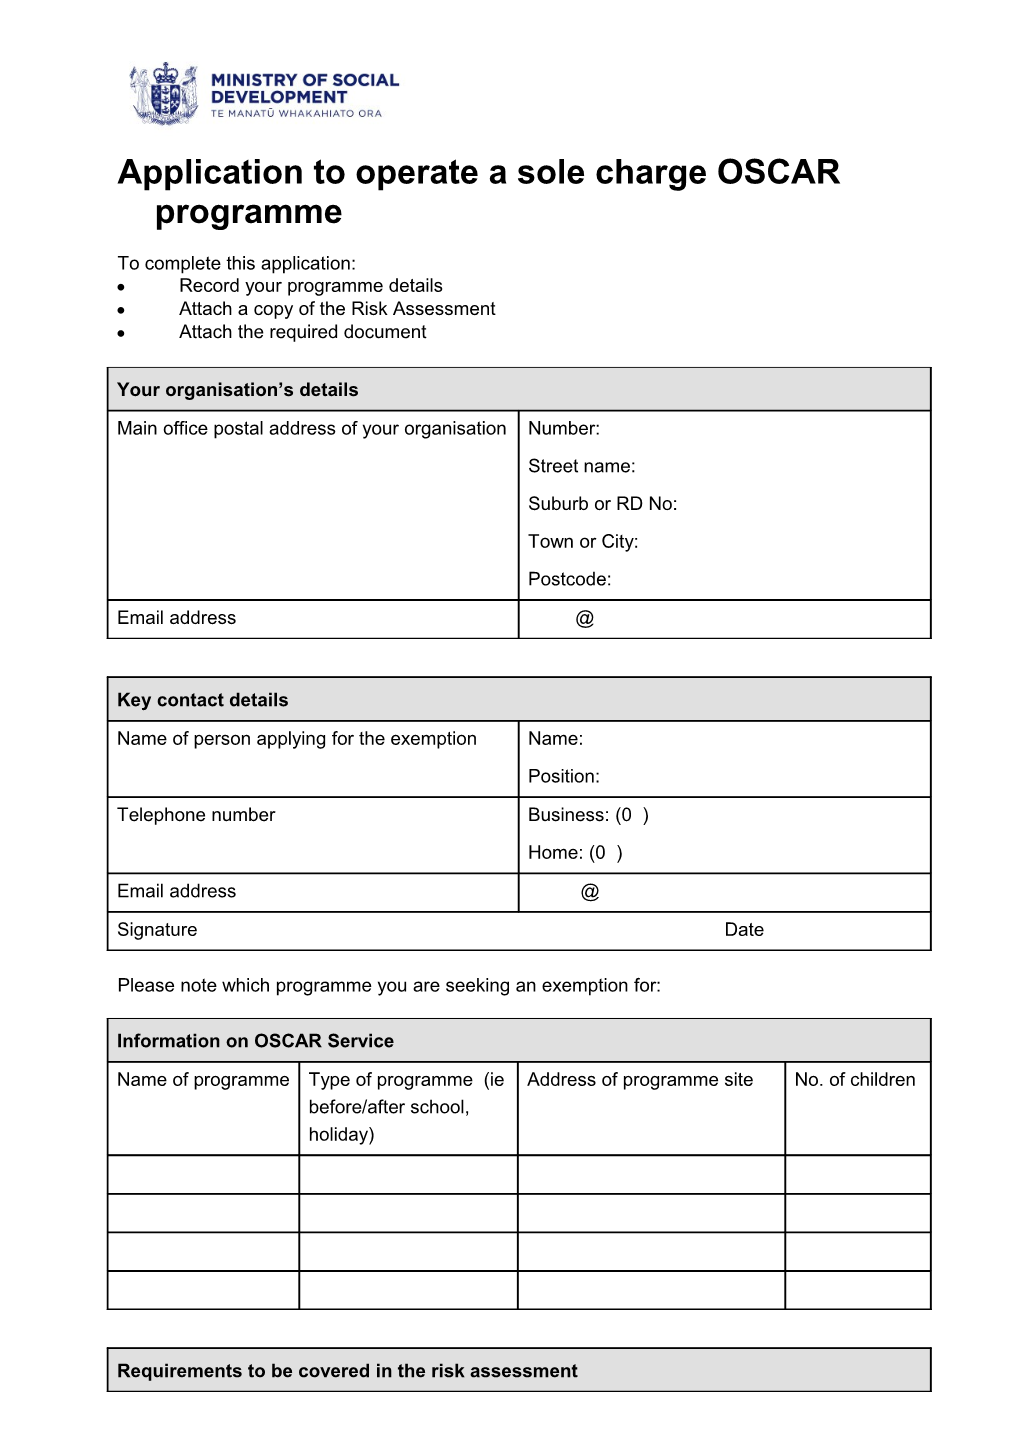 Application to Operate a Sole Charge OSCAR Programme